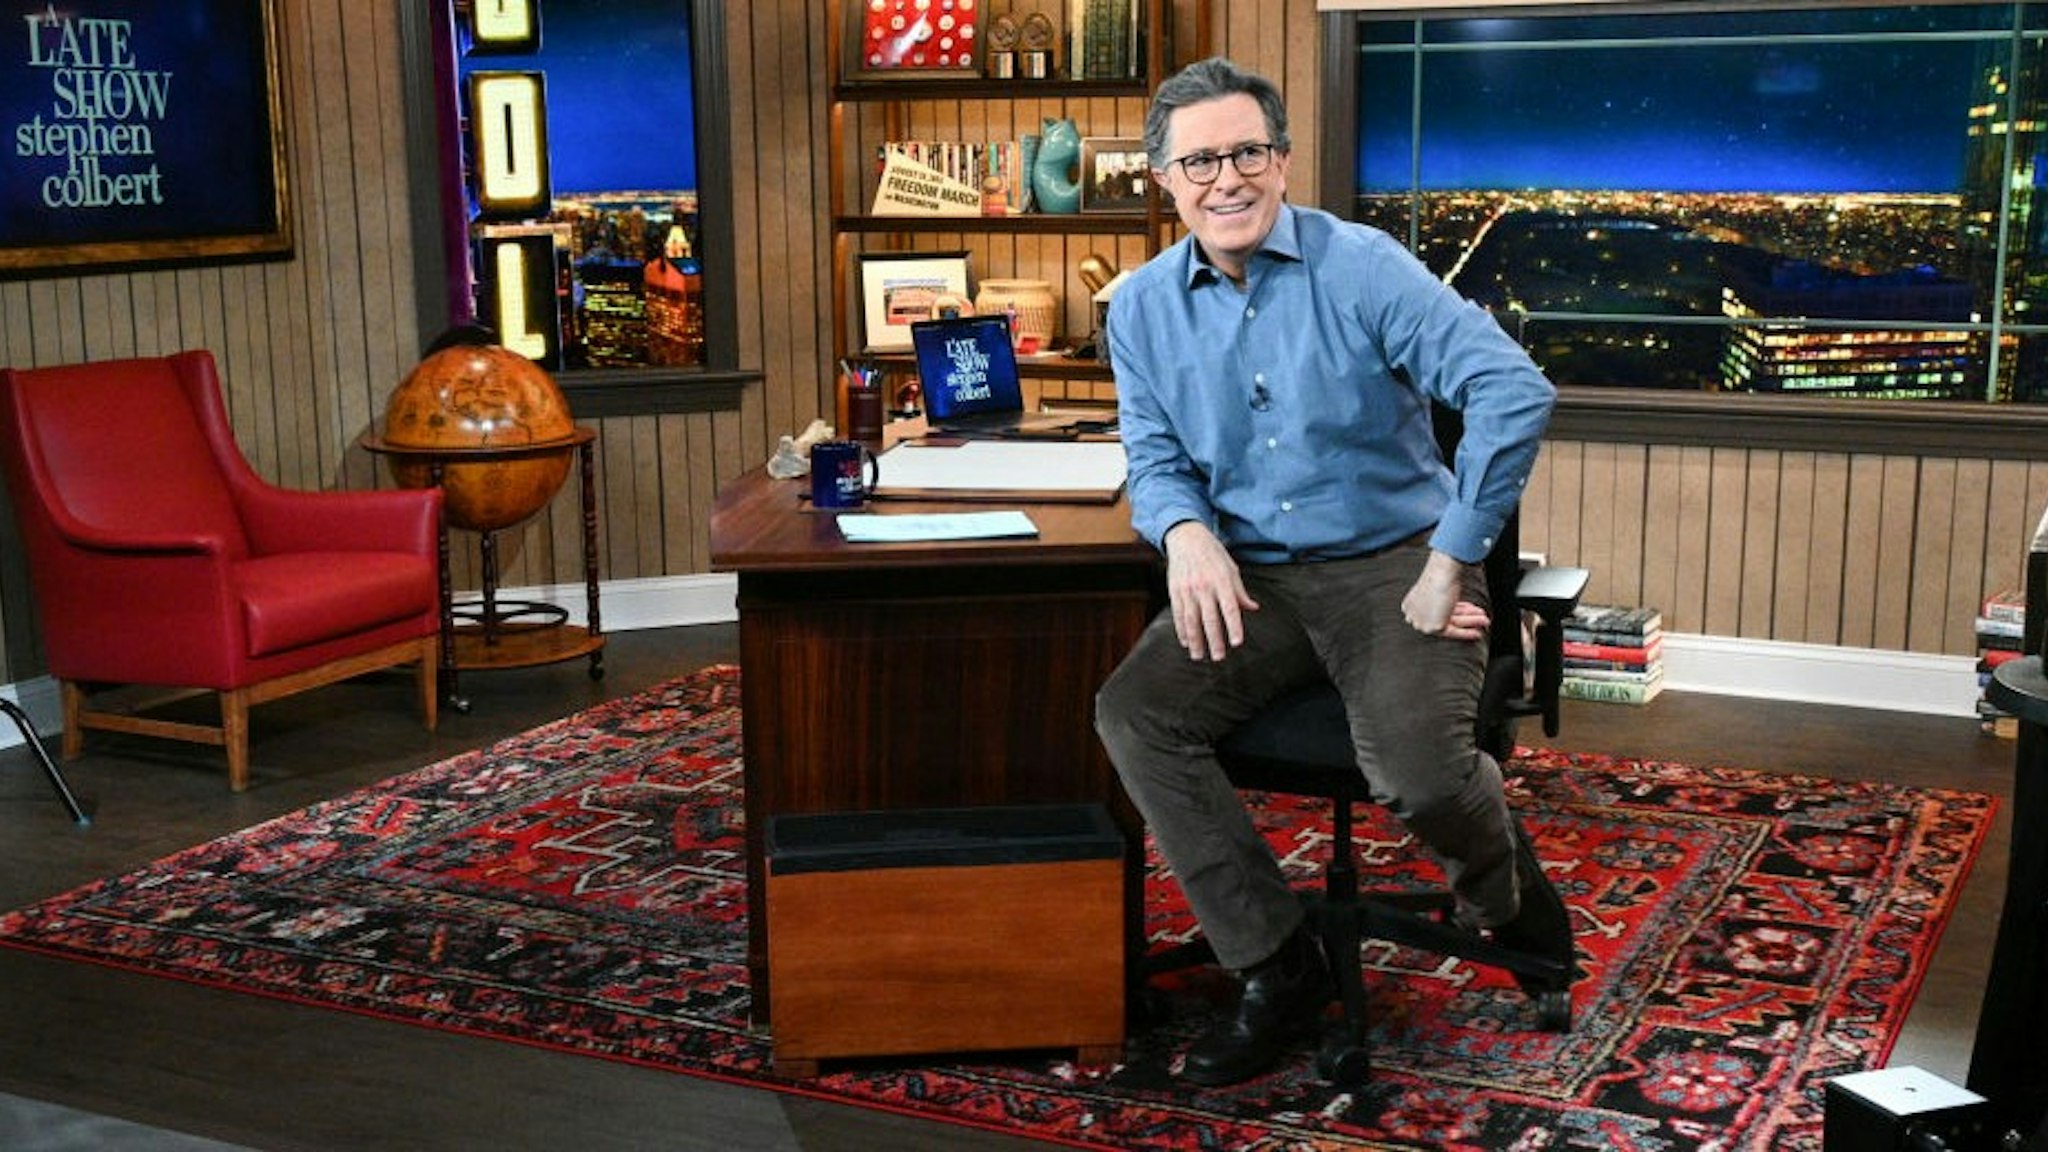 NEW YORK - DECEMBER 14: A Late Show with Stephen Colbert during Monday's December 14 2020 show. (Photo by